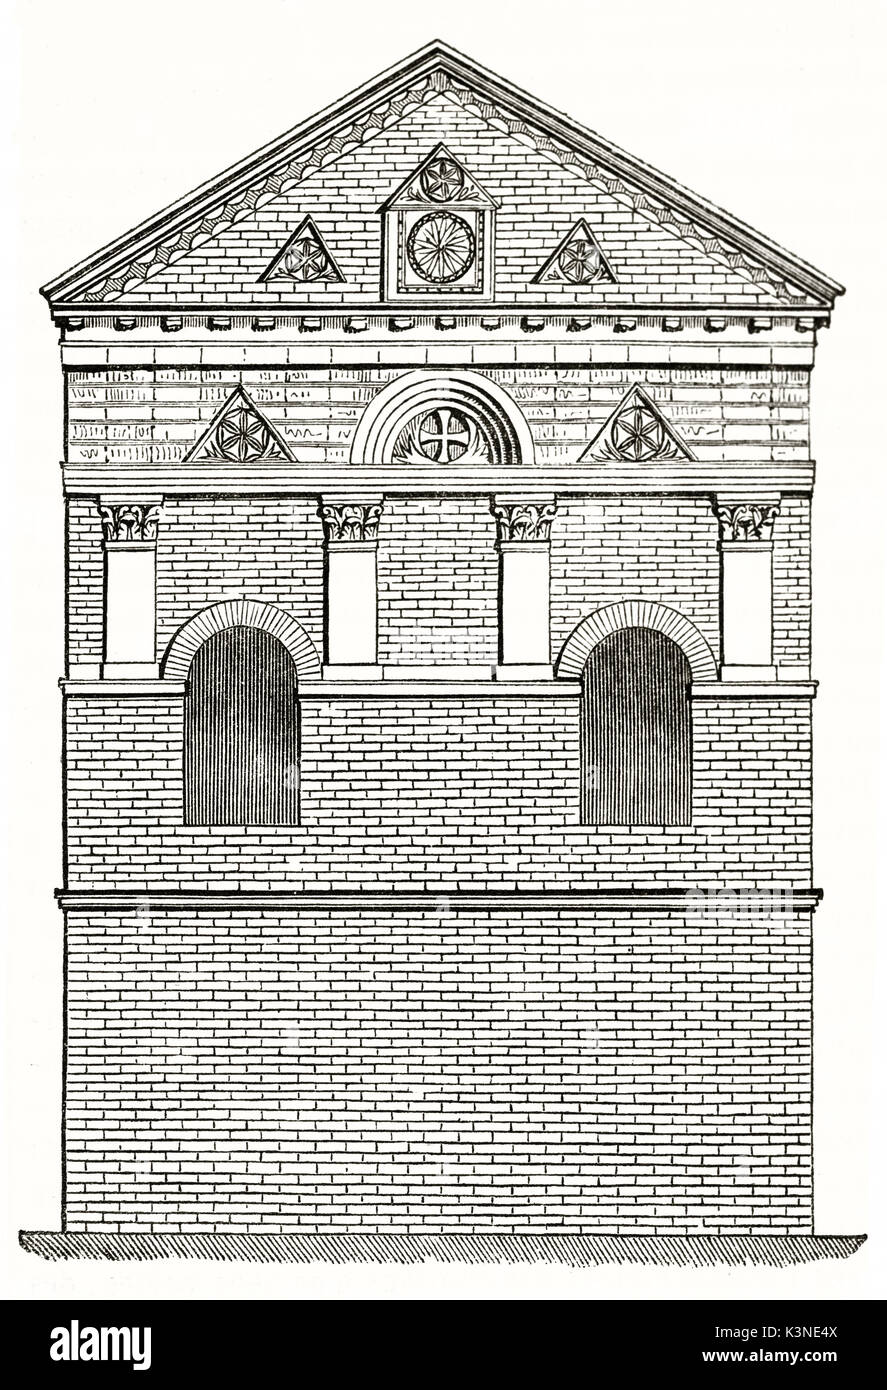 front view of a isolated religious edifice made with bricks wall. Baptistere Saint-Jean (Baptistery of St. John) Poitiers France. By unidentified author published on Magasin Pittoresque Paris 1839 Stock Photo